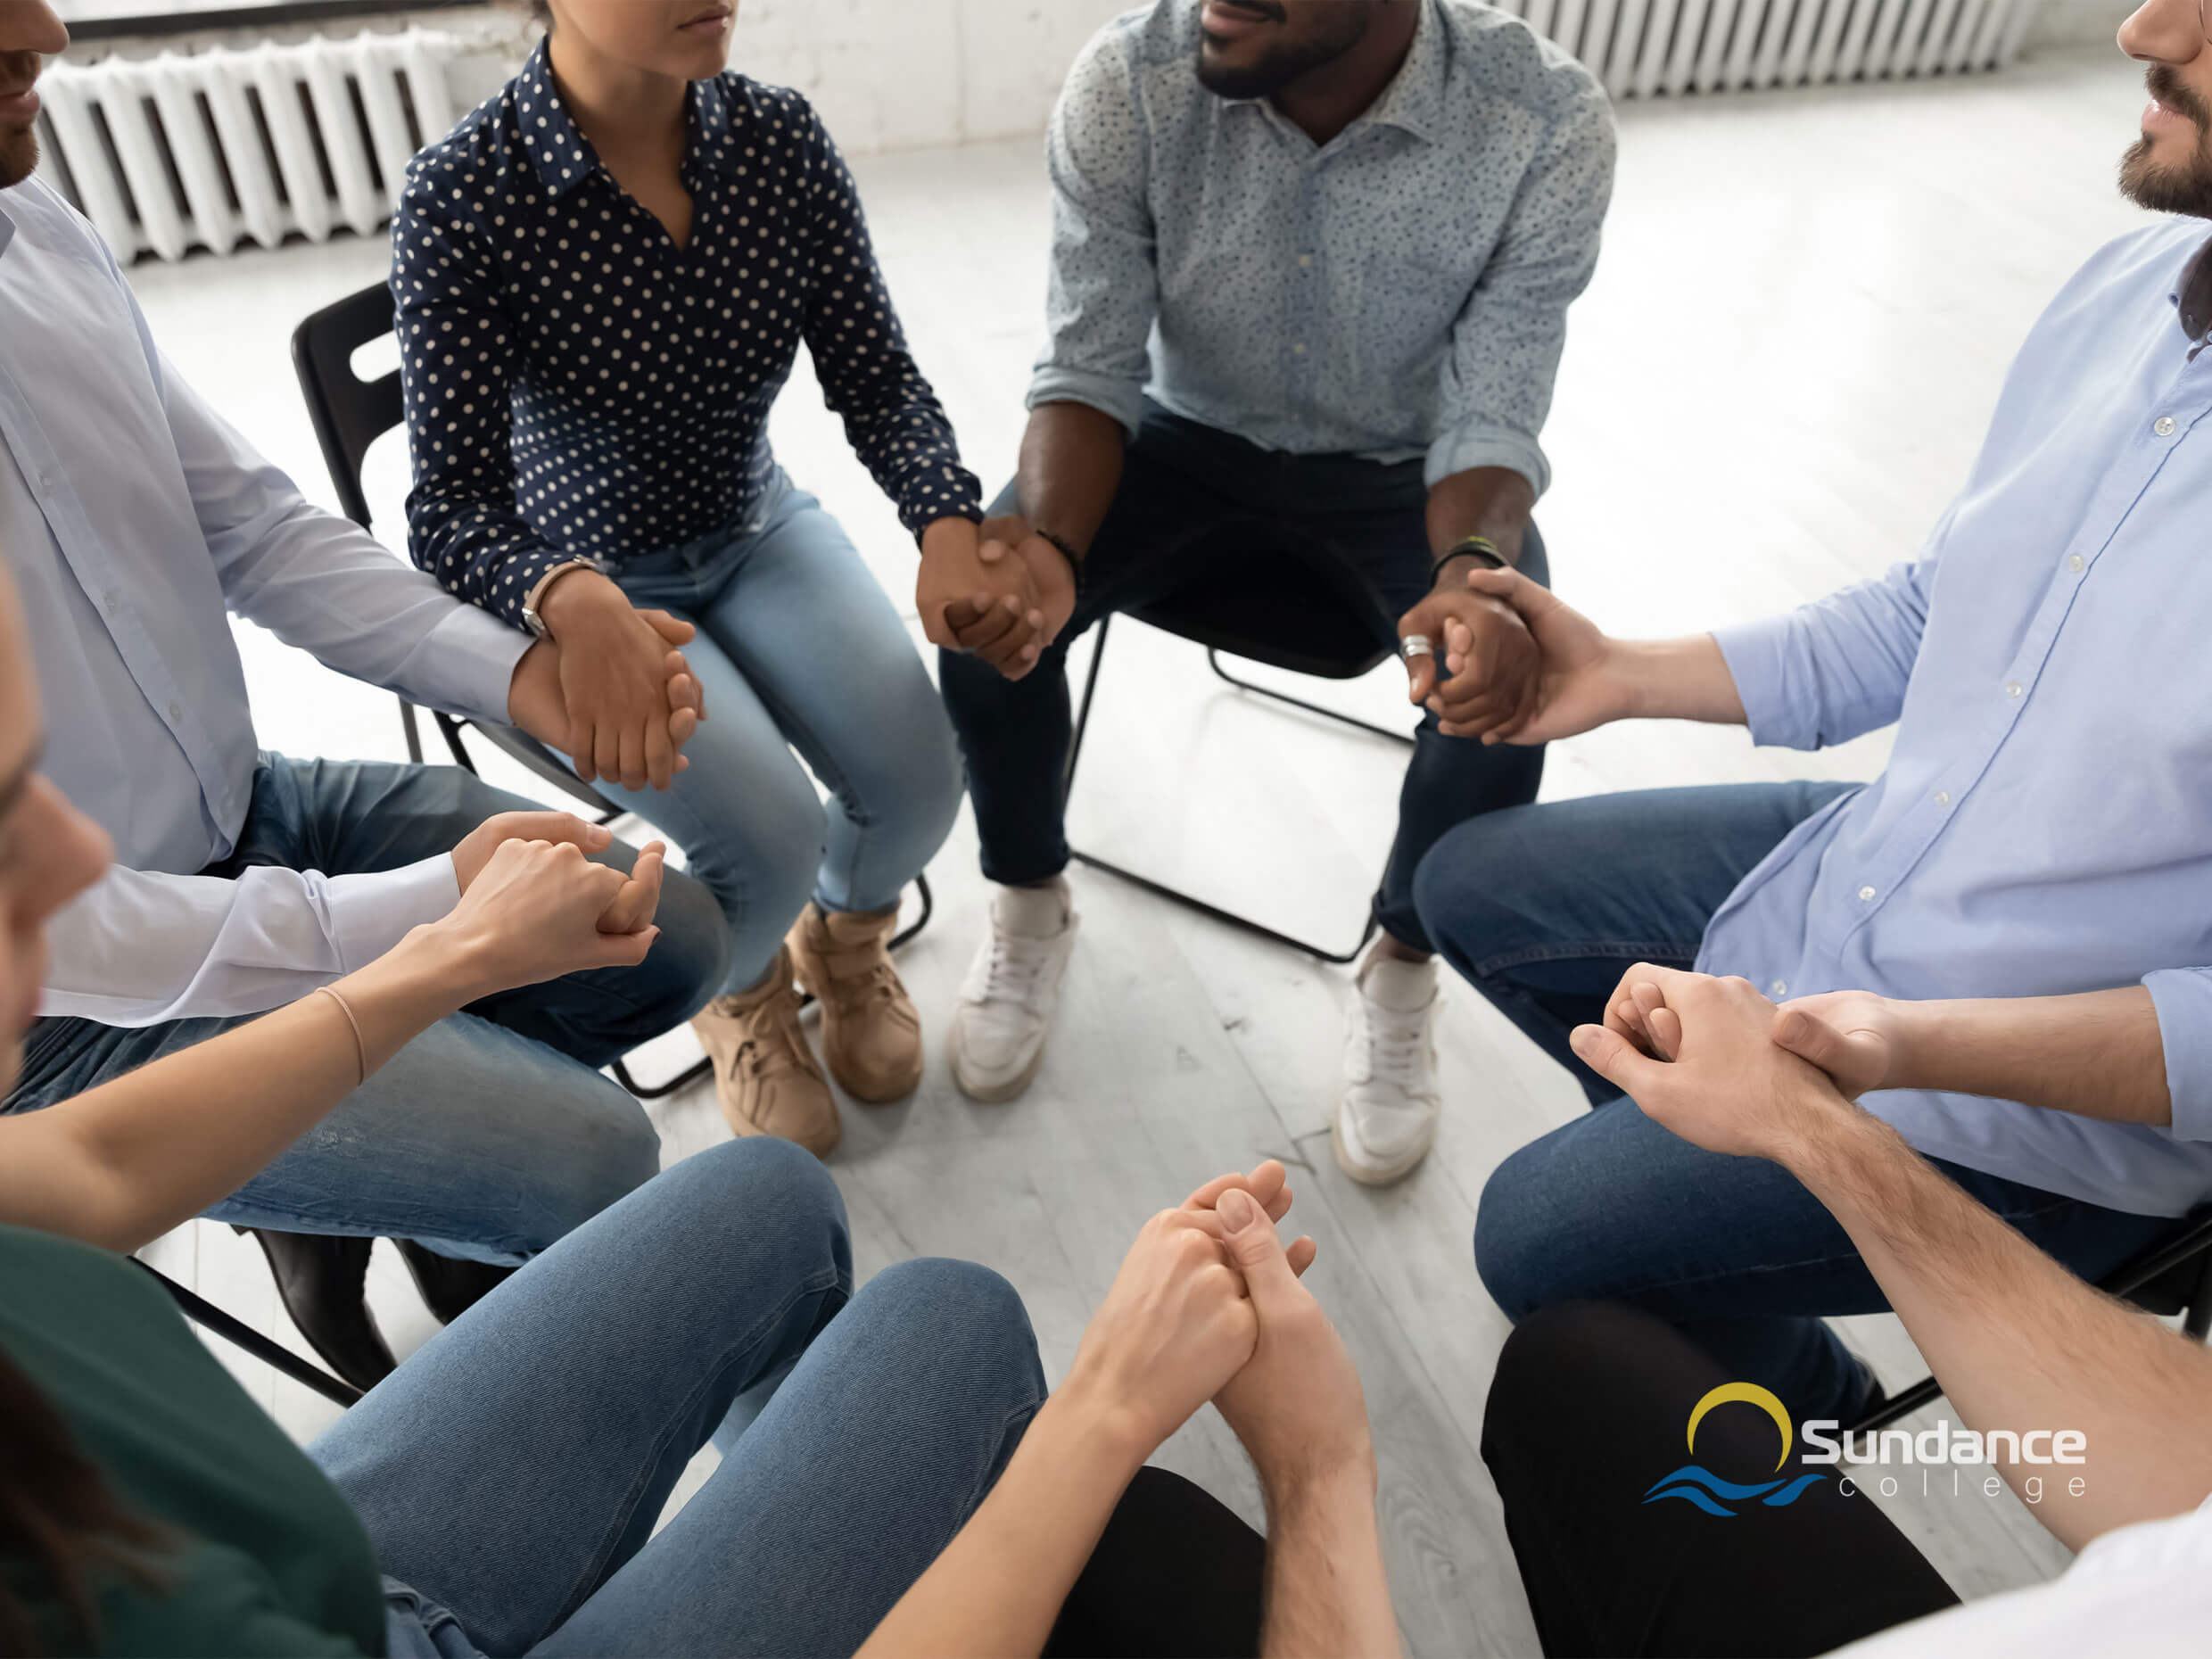 A circle of people in chairs holding hands as part of a group therapy session run by an addictions worker trained in evidenced-based community health procedures